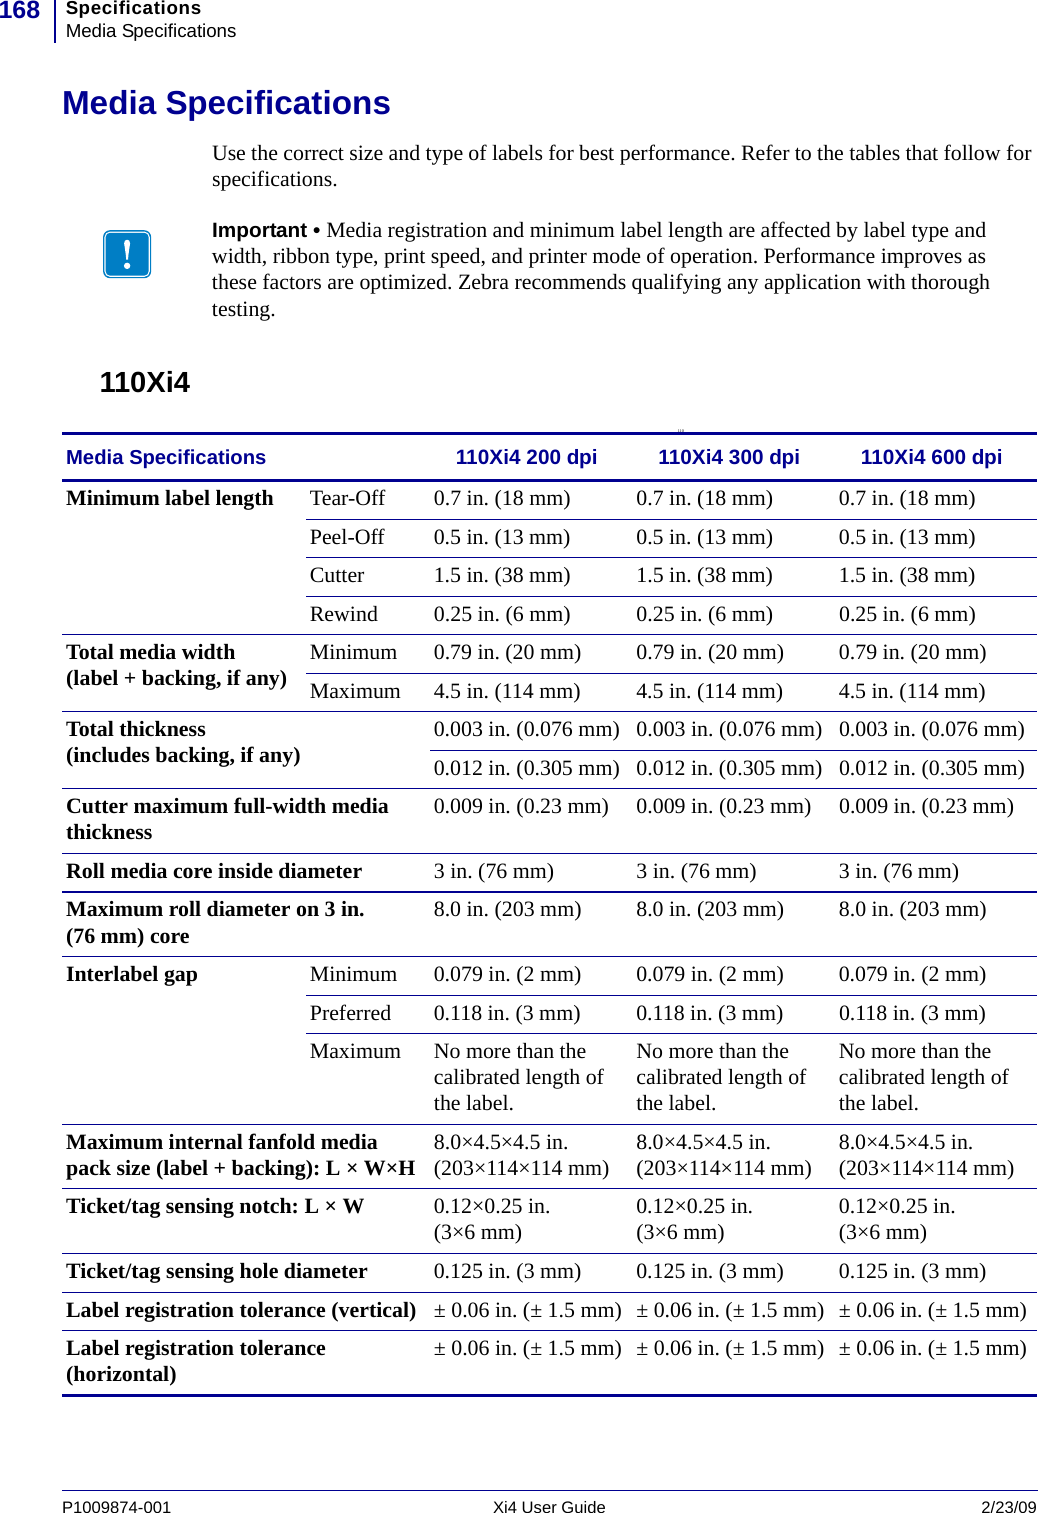 SpecificationsMedia Specifications168P1009874-001   Xi4 User Guide 2/23/09Media SpecificationsUse the correct size and type of labels for best performance. Refer to the tables that follow for specifications.110Xi4110Important • Media registration and minimum label length are affected by label type and width, ribbon type, print speed, and printer mode of operation. Performance improves as these factors are optimized. Zebra recommends qualifying any application with thorough testing.Media Specifications 110Xi4 200 dpi 110Xi4 300 dpi 110Xi4 600 dpiMinimum label length Tear-Off 0.7 in. (18 mm) 0.7 in. (18 mm) 0.7 in. (18 mm)Peel-Off 0.5 in. (13 mm) 0.5 in. (13 mm) 0.5 in. (13 mm)Cutter 1.5 in. (38 mm) 1.5 in. (38 mm) 1.5 in. (38 mm)Rewind 0.25 in. (6 mm) 0.25 in. (6 mm) 0.25 in. (6 mm)Total media width (label + backing, if any) Minimum 0.79 in. (20 mm) 0.79 in. (20 mm) 0.79 in. (20 mm)Maximum 4.5 in. (114 mm) 4.5 in. (114 mm) 4.5 in. (114 mm)Total thickness (includes backing, if any) 0.003 in. (0.076 mm) 0.003 in. (0.076 mm) 0.003 in. (0.076 mm)0.012 in. (0.305 mm) 0.012 in. (0.305 mm) 0.012 in. (0.305 mm)Cutter maximum full-width media thickness 0.009 in. (0.23 mm) 0.009 in. (0.23 mm) 0.009 in. (0.23 mm)Roll media core inside diameter 3 in. (76 mm) 3 in. (76 mm) 3 in. (76 mm)Maximum roll diameter on 3 in. (76 mm) core 8.0 in. (203 mm) 8.0 in. (203 mm) 8.0 in. (203 mm)Interlabel gap Minimum 0.079 in. (2 mm) 0.079 in. (2 mm) 0.079 in. (2 mm)Preferred 0.118 in. (3 mm) 0.118 in. (3 mm) 0.118 in. (3 mm)Maximum No more than the calibrated length of the label.No more than the calibrated length of the label.No more than the calibrated length of the label.Maximum internal fanfold media pack size (label + backing): L × W×H 8.0×4.5×4.5 in. (203×114×114 mm) 8.0×4.5×4.5 in. (203×114×114 mm) 8.0×4.5×4.5 in. (203×114×114 mm)Ticket/tag sensing notch: L × W 0.12×0.25 in. (3×6 mm) 0.12×0.25 in. (3×6 mm) 0.12×0.25 in. (3×6 mm)Ticket/tag sensing hole diameter 0.125 in. (3 mm) 0.125 in. (3 mm) 0.125 in. (3 mm)Label registration tolerance (vertical) ± 0.06 in. (± 1.5 mm) ± 0.06 in. (± 1.5 mm) ± 0.06 in. (± 1.5 mm)Label registration tolerance (horizontal) ± 0.06 in. (± 1.5 mm) ± 0.06 in. (± 1.5 mm) ± 0.06 in. (± 1.5 mm)